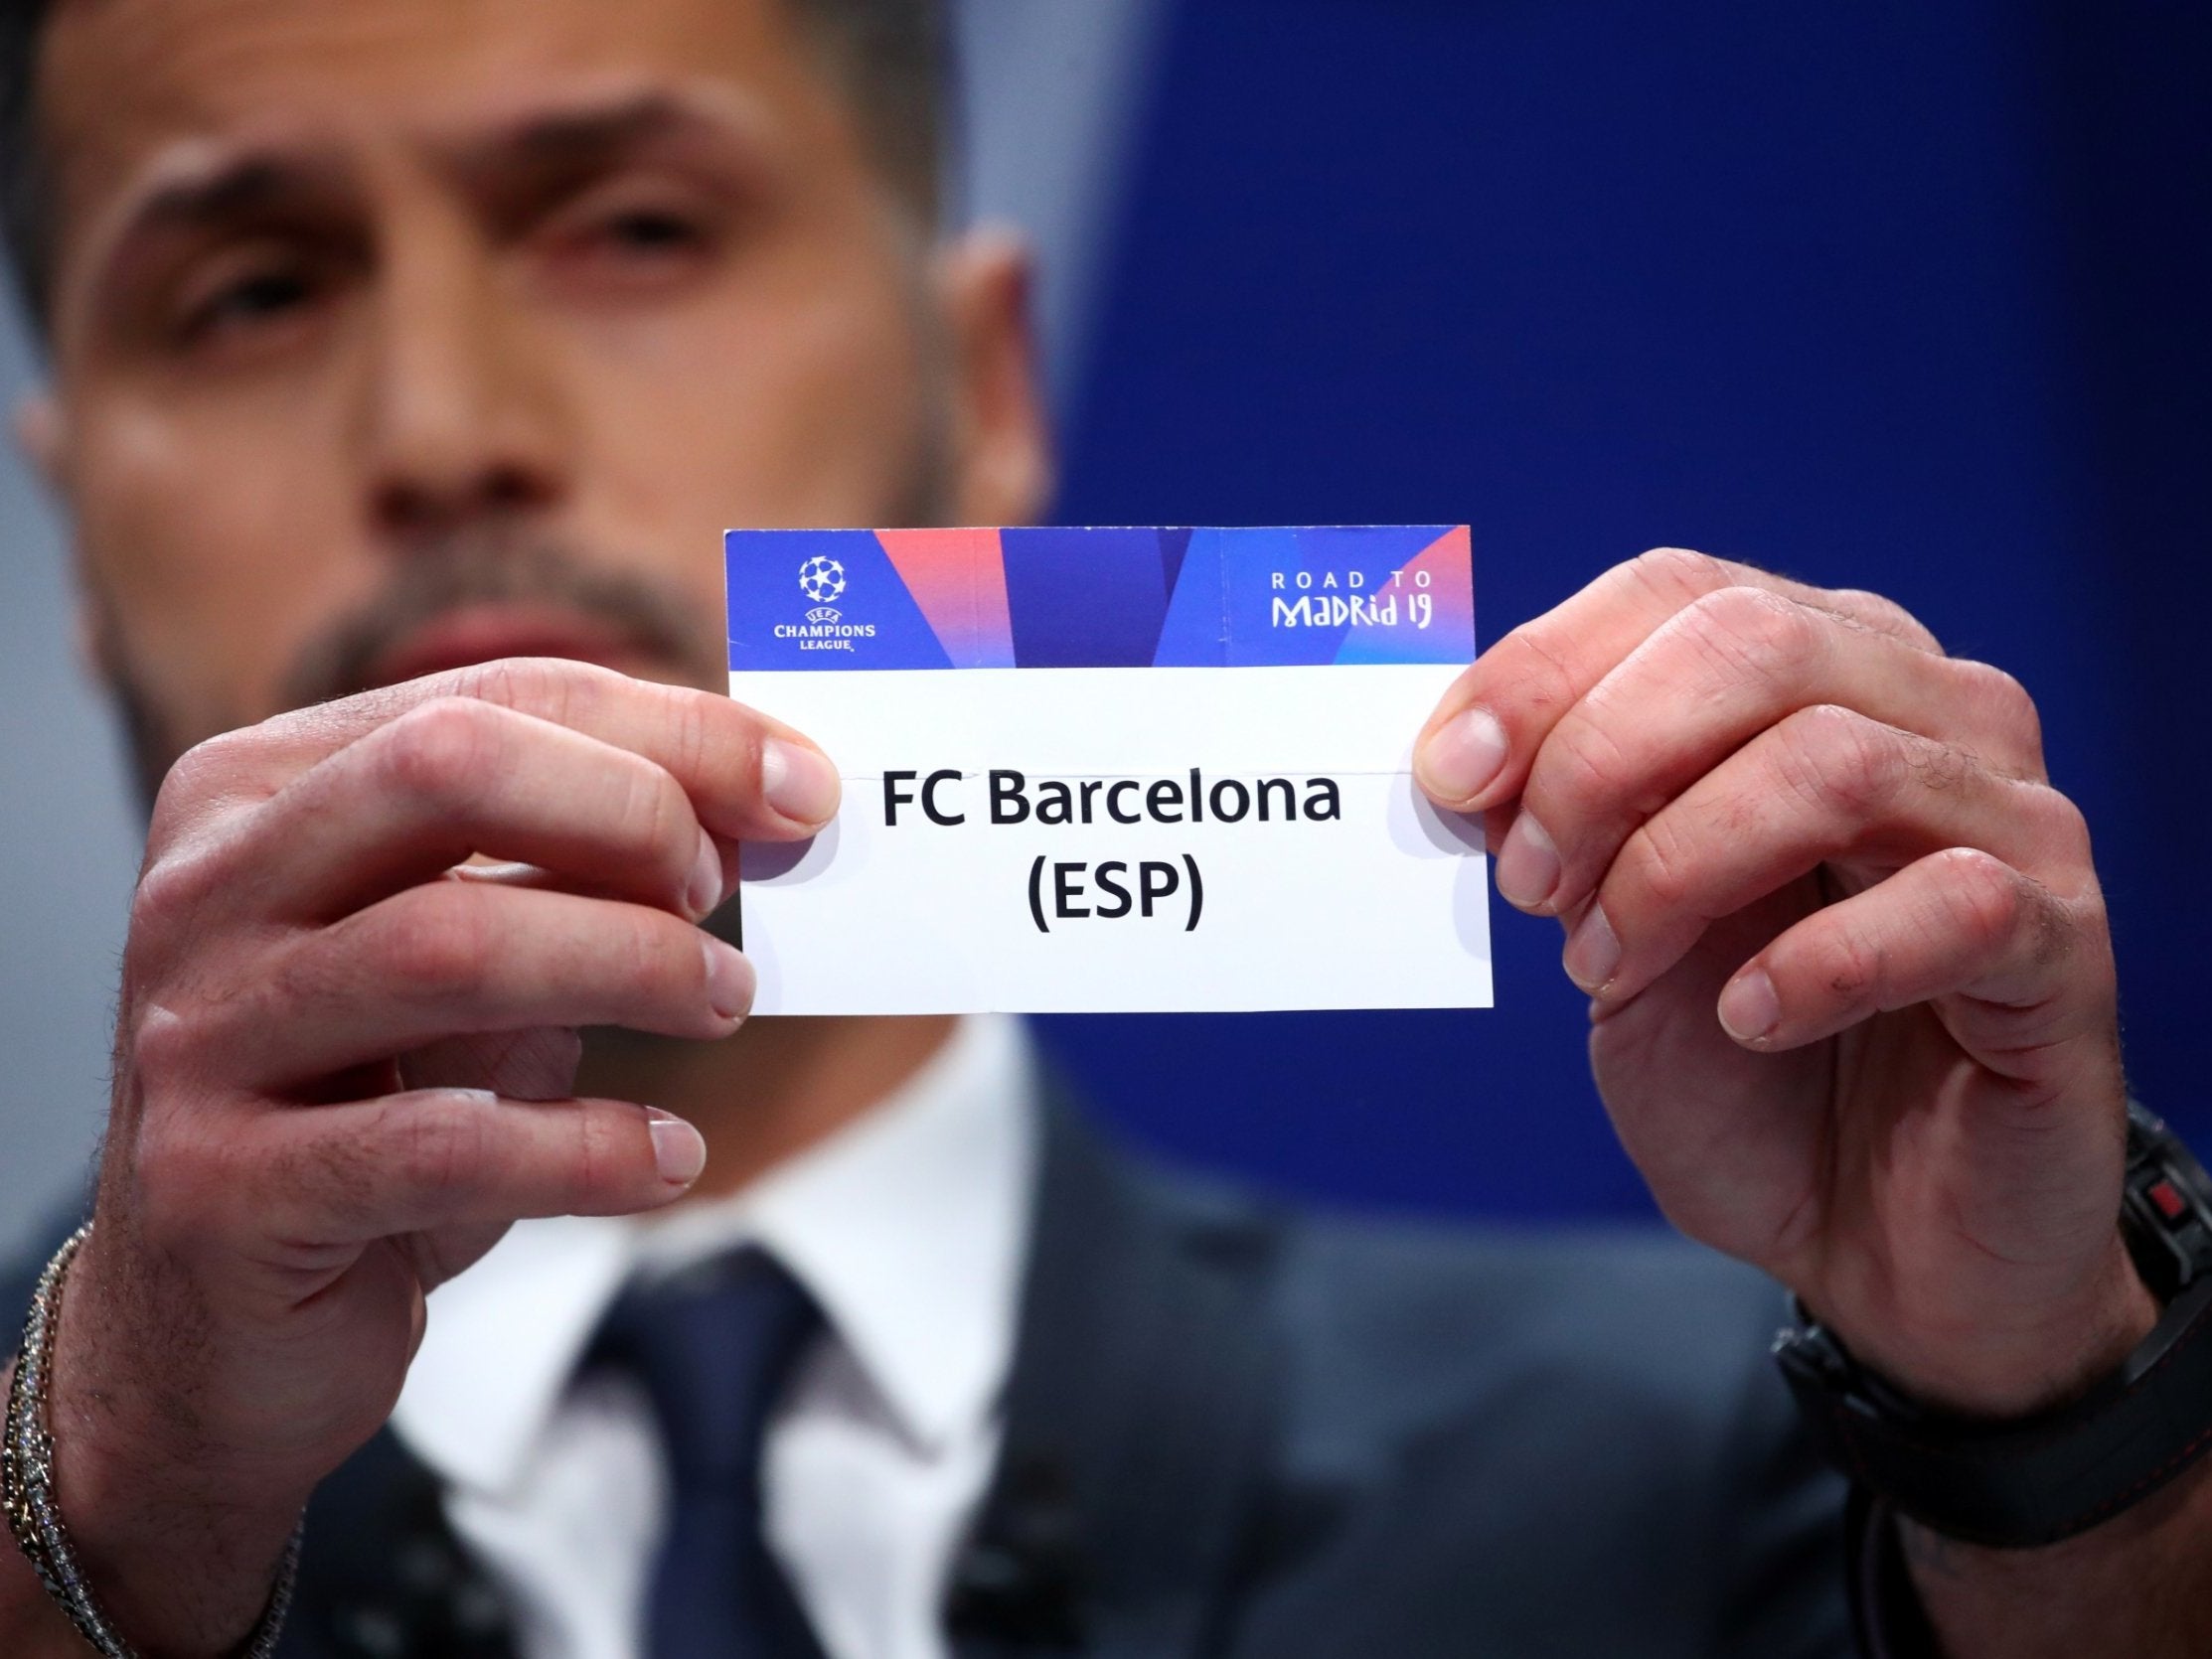 Champions League draw: Manchester United face Barcelona in quarter-finals